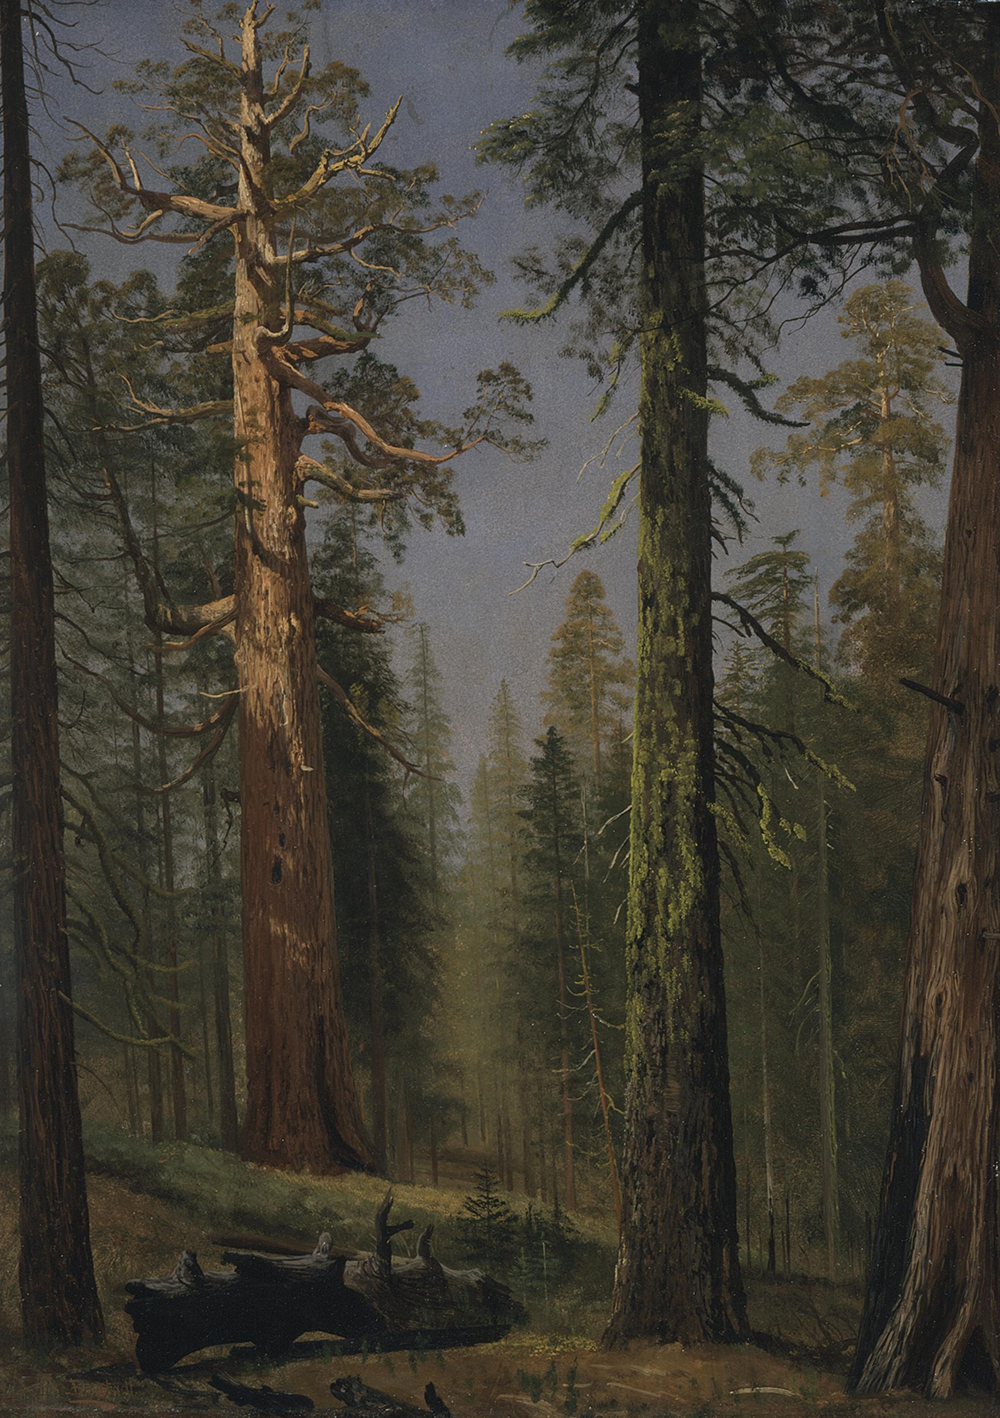 Albert Bierstadt The Grizzly Giant Sequoia, Mariposa Grove, California oil painting reproduction